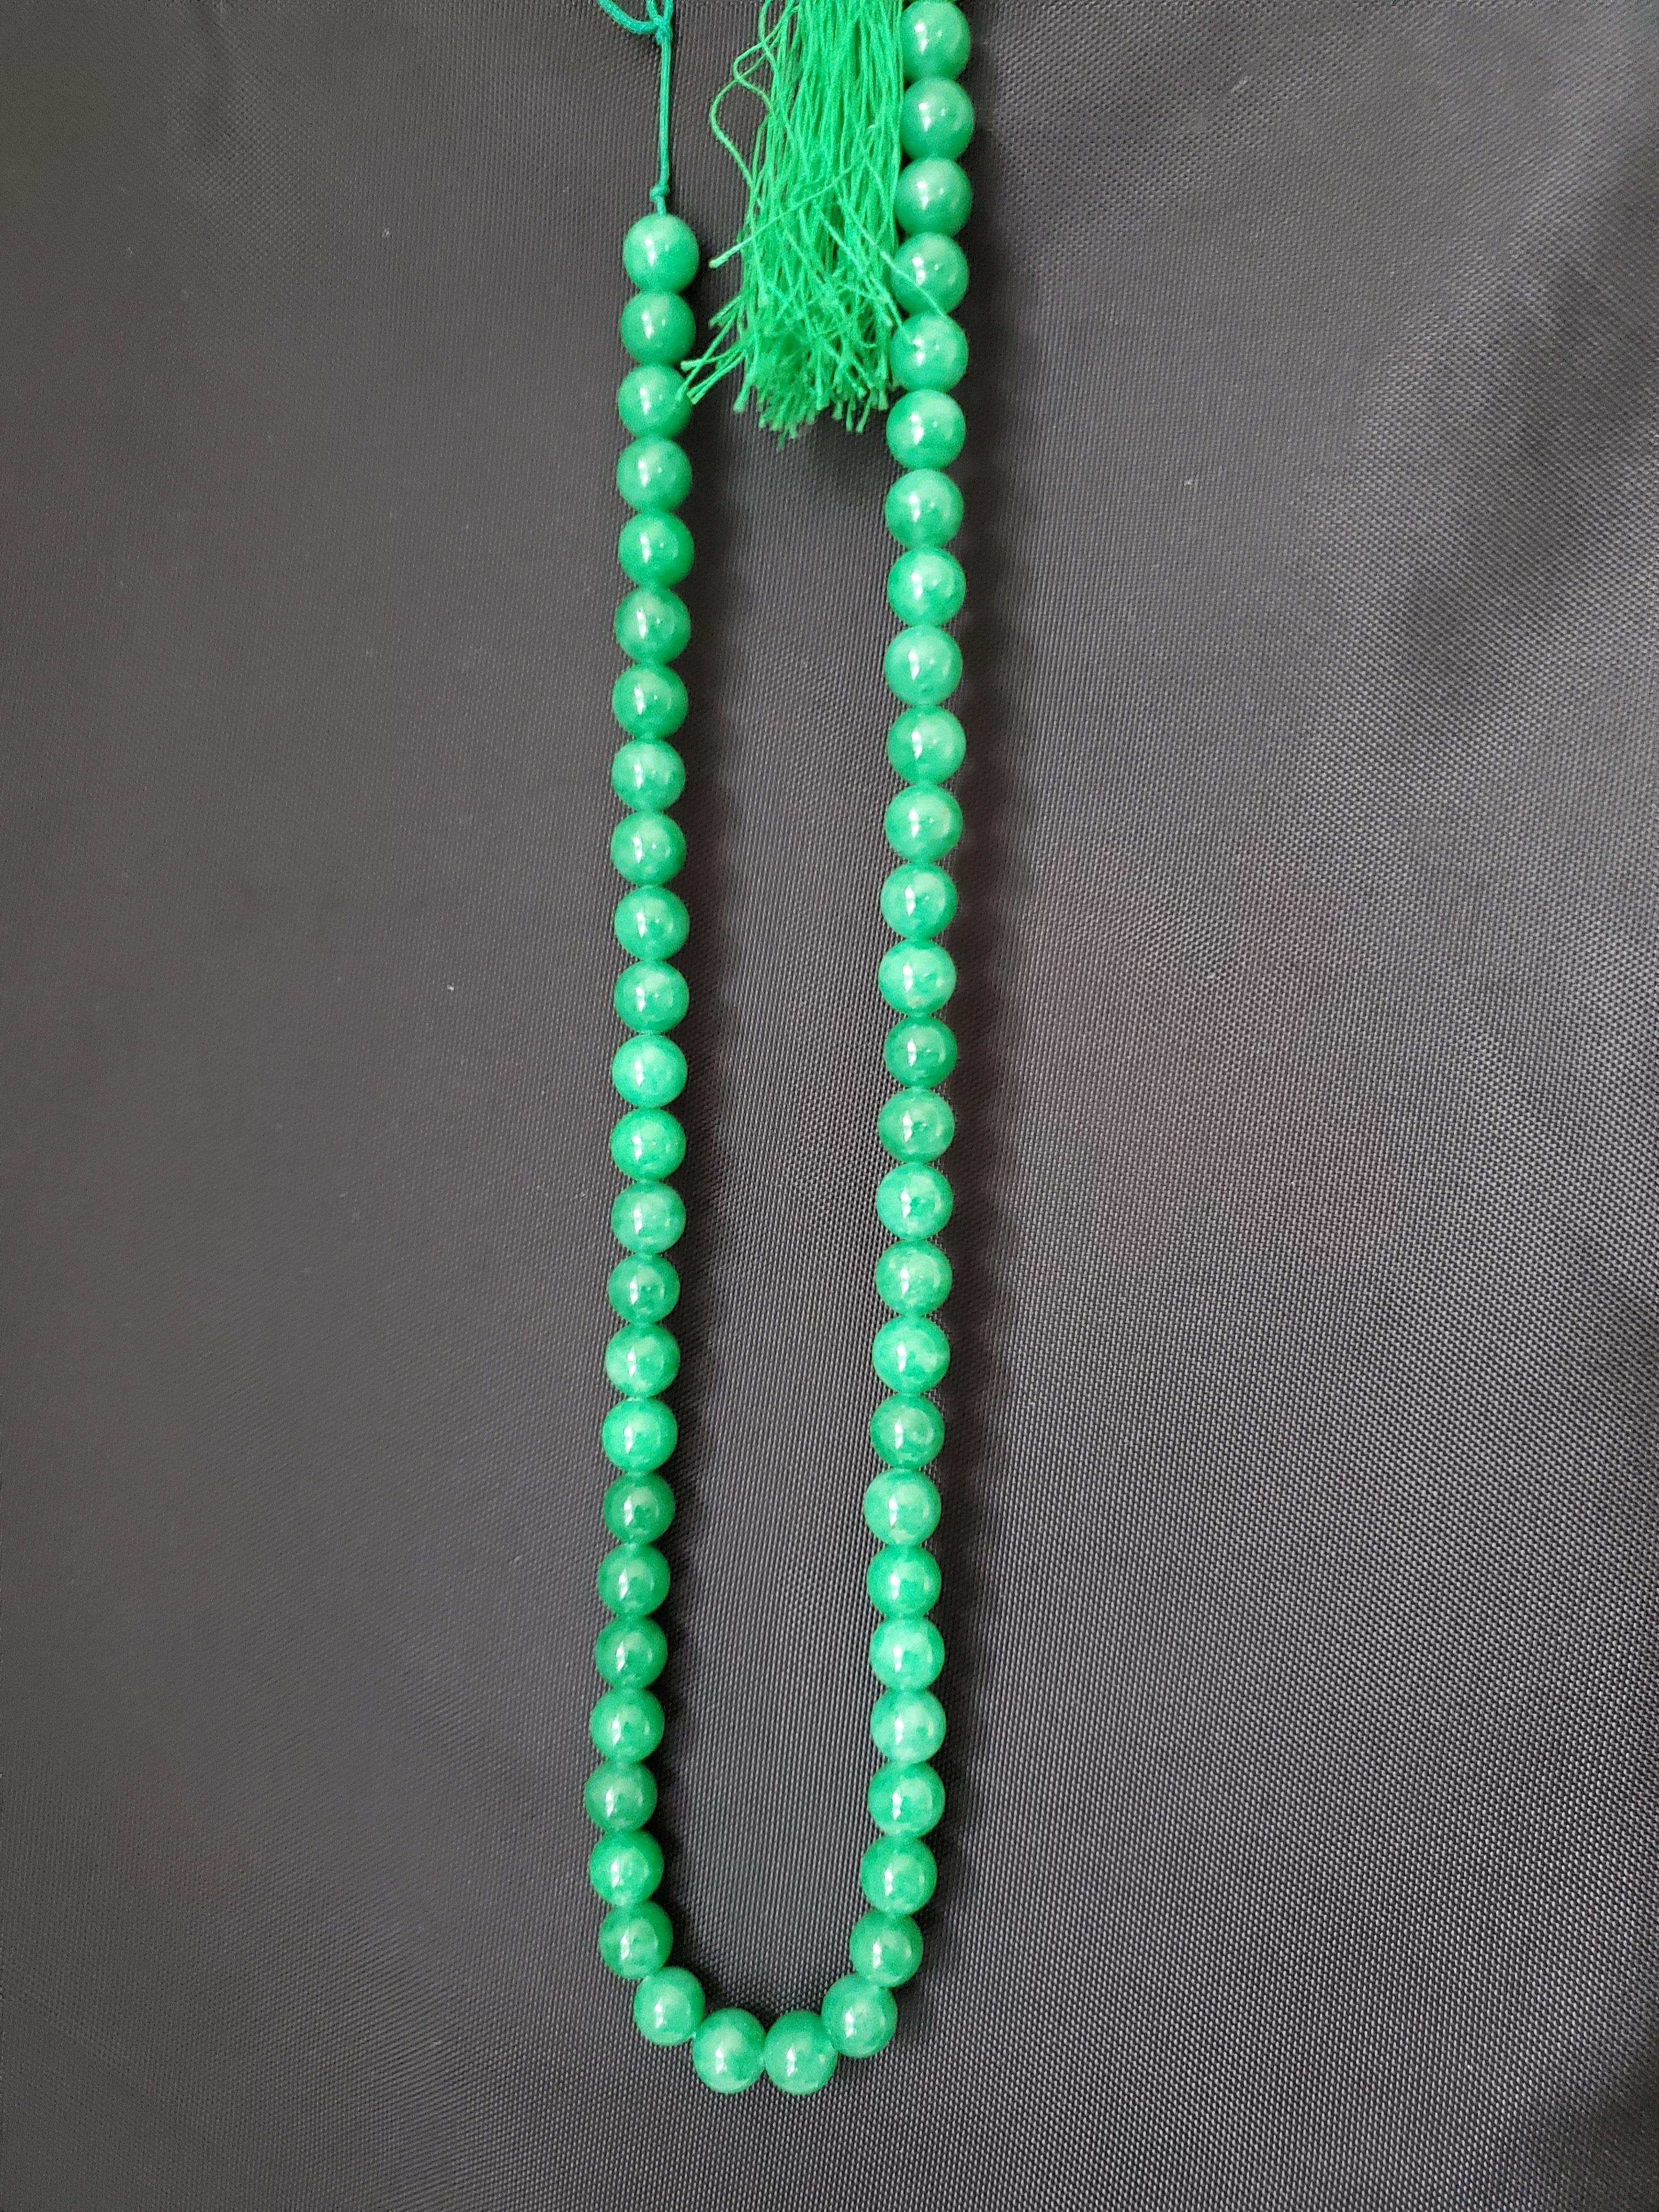 Chinese Vintage or Antique Emerald Green Jadeite Necklace, Mala, or Prayer Beads